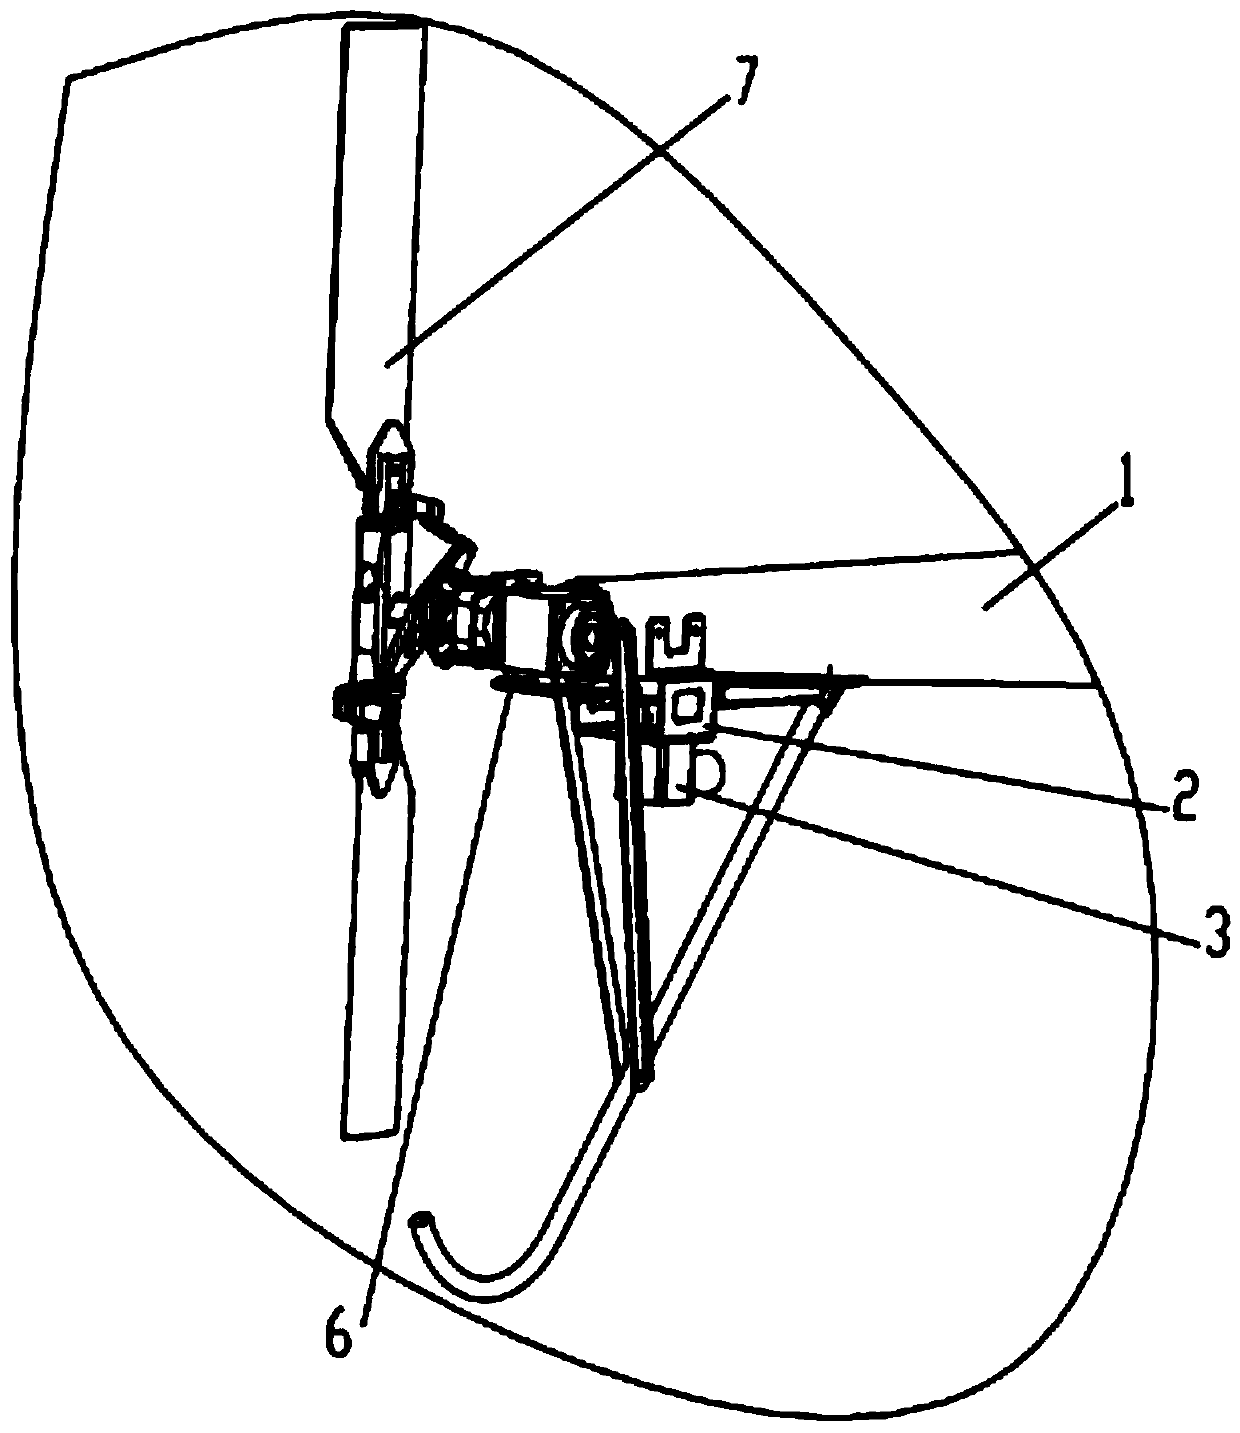 Tail vane refitting structure for refitting manned helicopter into aviation fire extinguishing device